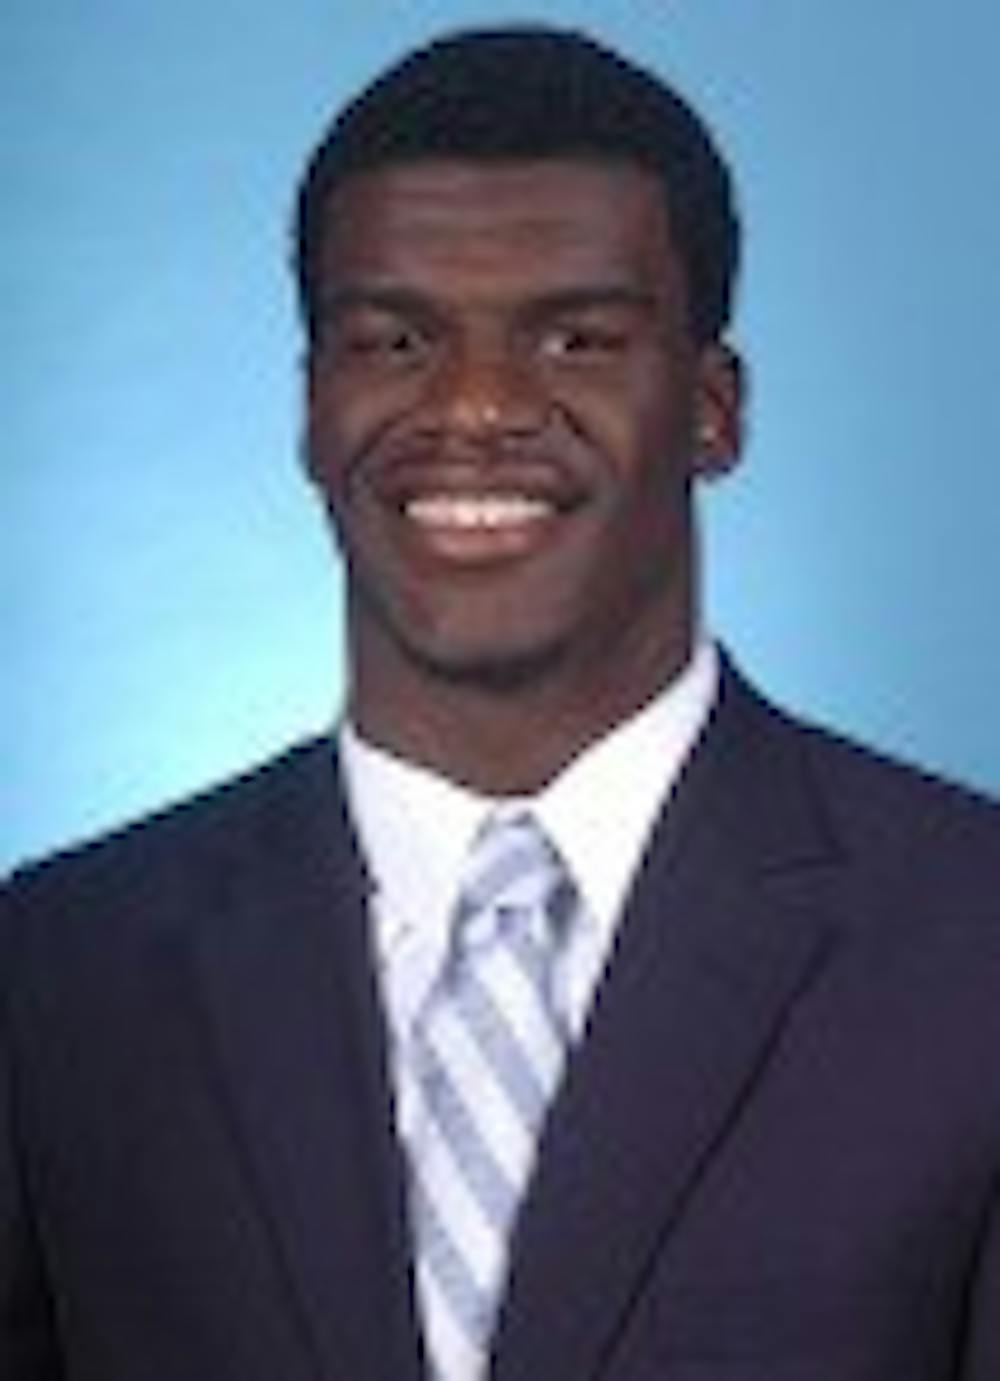 	Greg Little  was a receiver for the UNC football team from 2007-2009 before he was deemed ineligible in 2010.